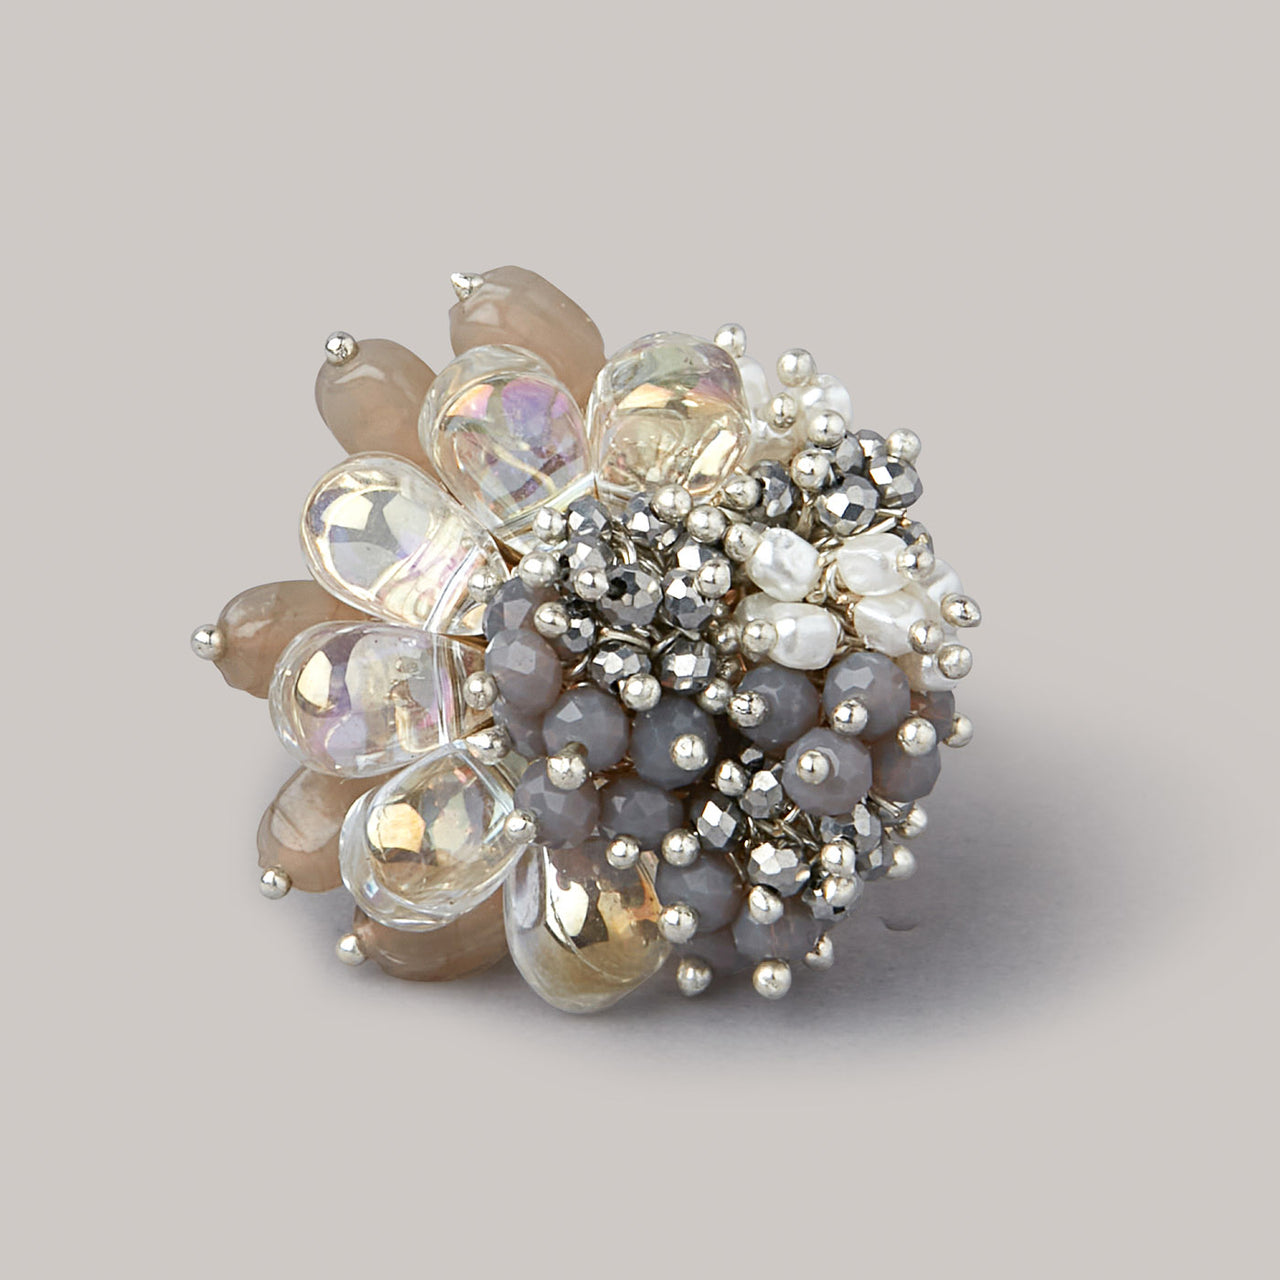 DORO - Silver Plated Metallic Ring With Stones And Pearls - Meraki Lifestyle Store